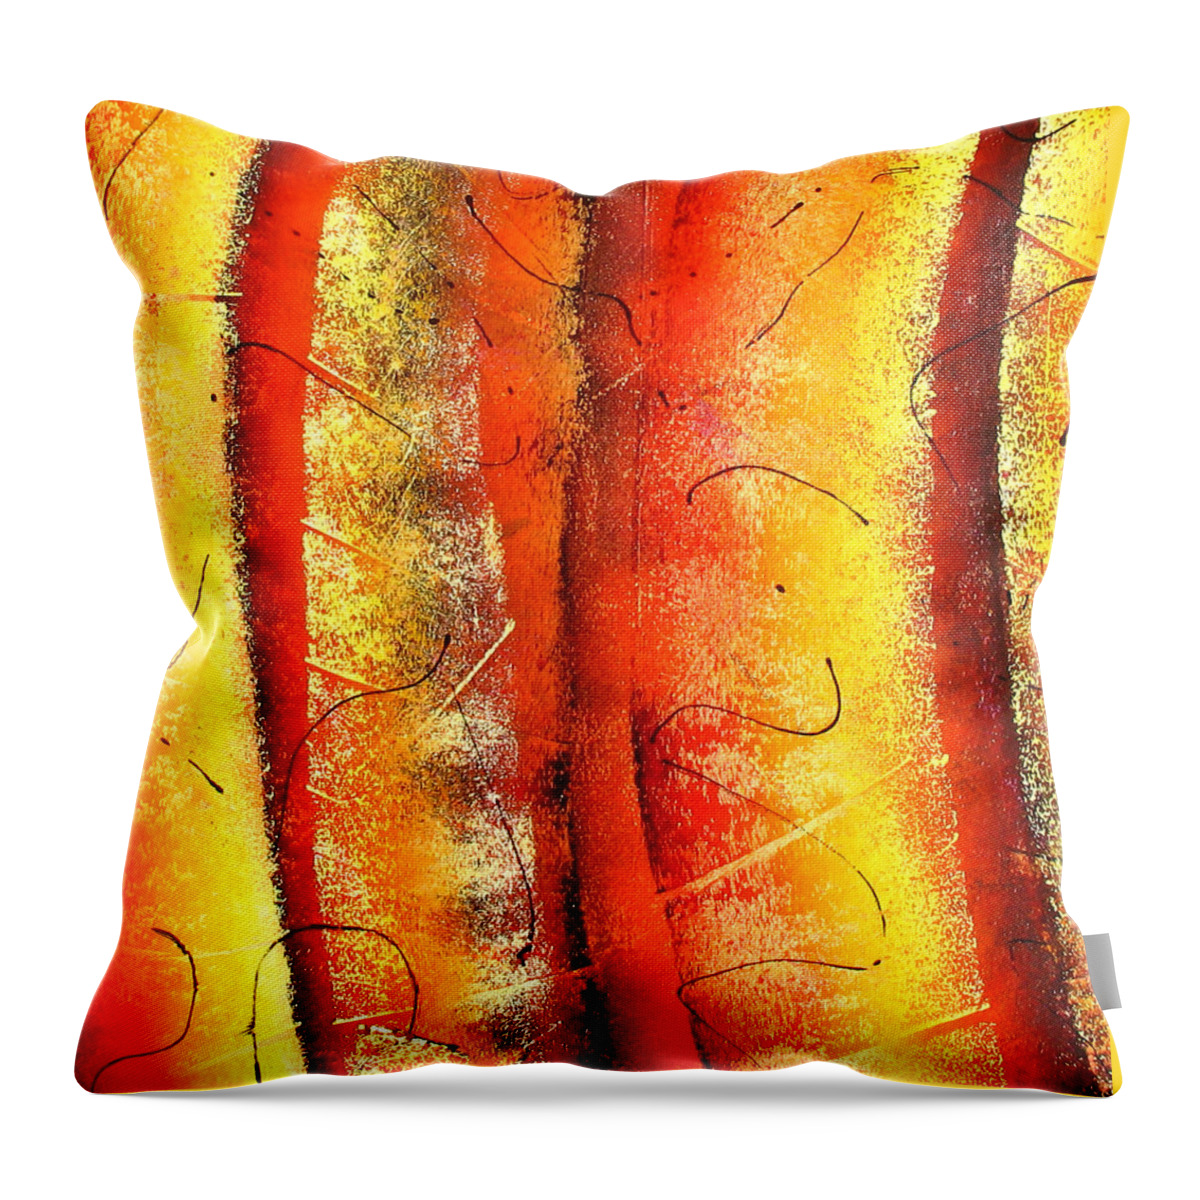  Throw Pillow featuring the painting Abstract r-1599 by Jay Bonifield